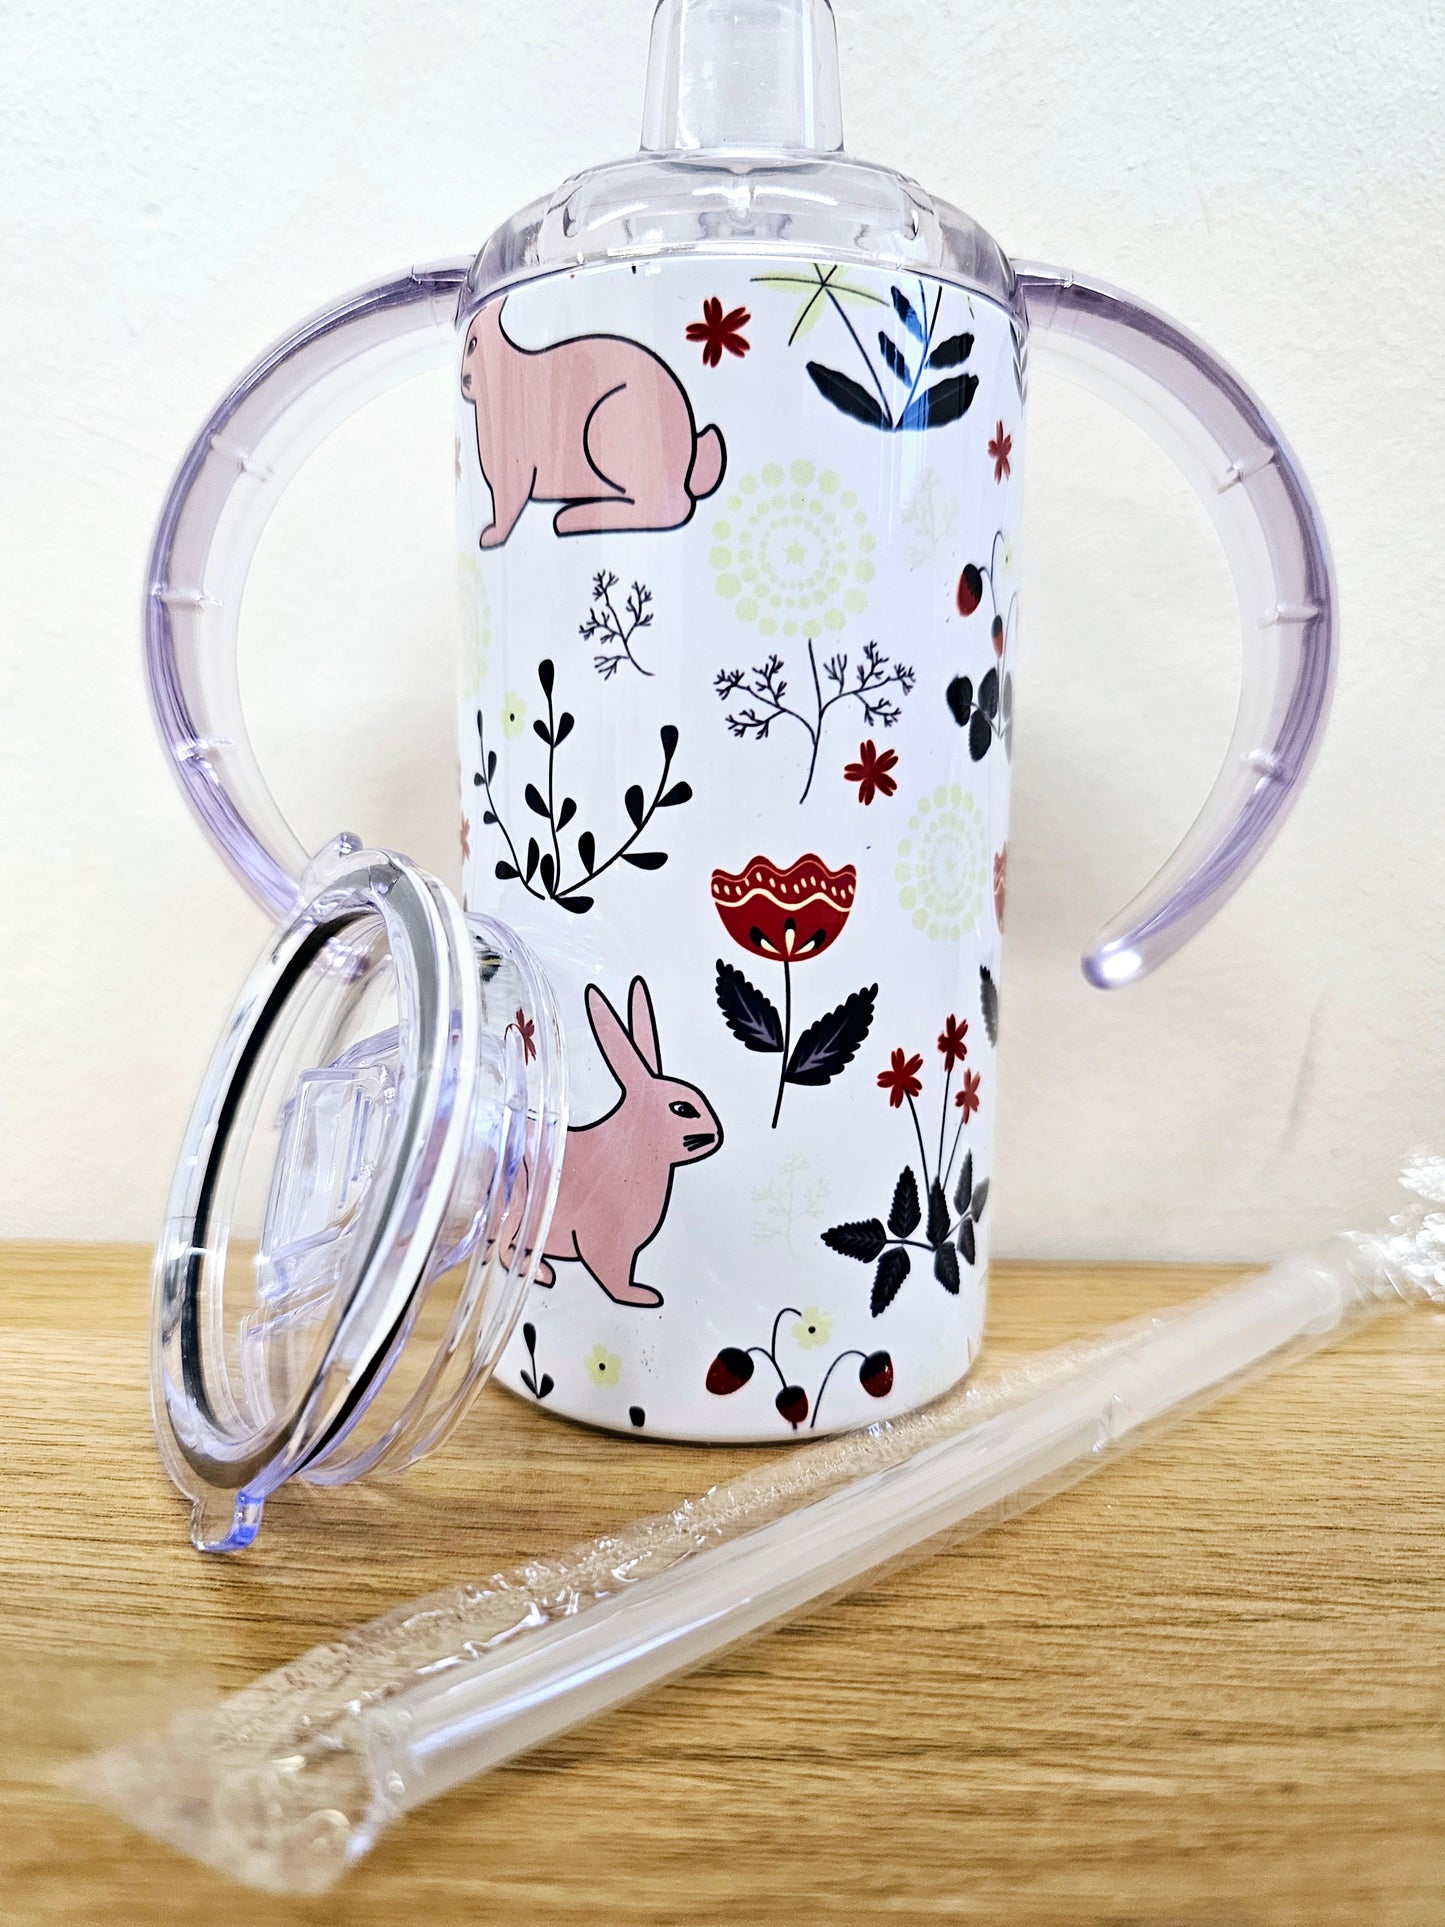 Sippy cup tumbler 12oz with double handle and straw lid rabbit and floral design.